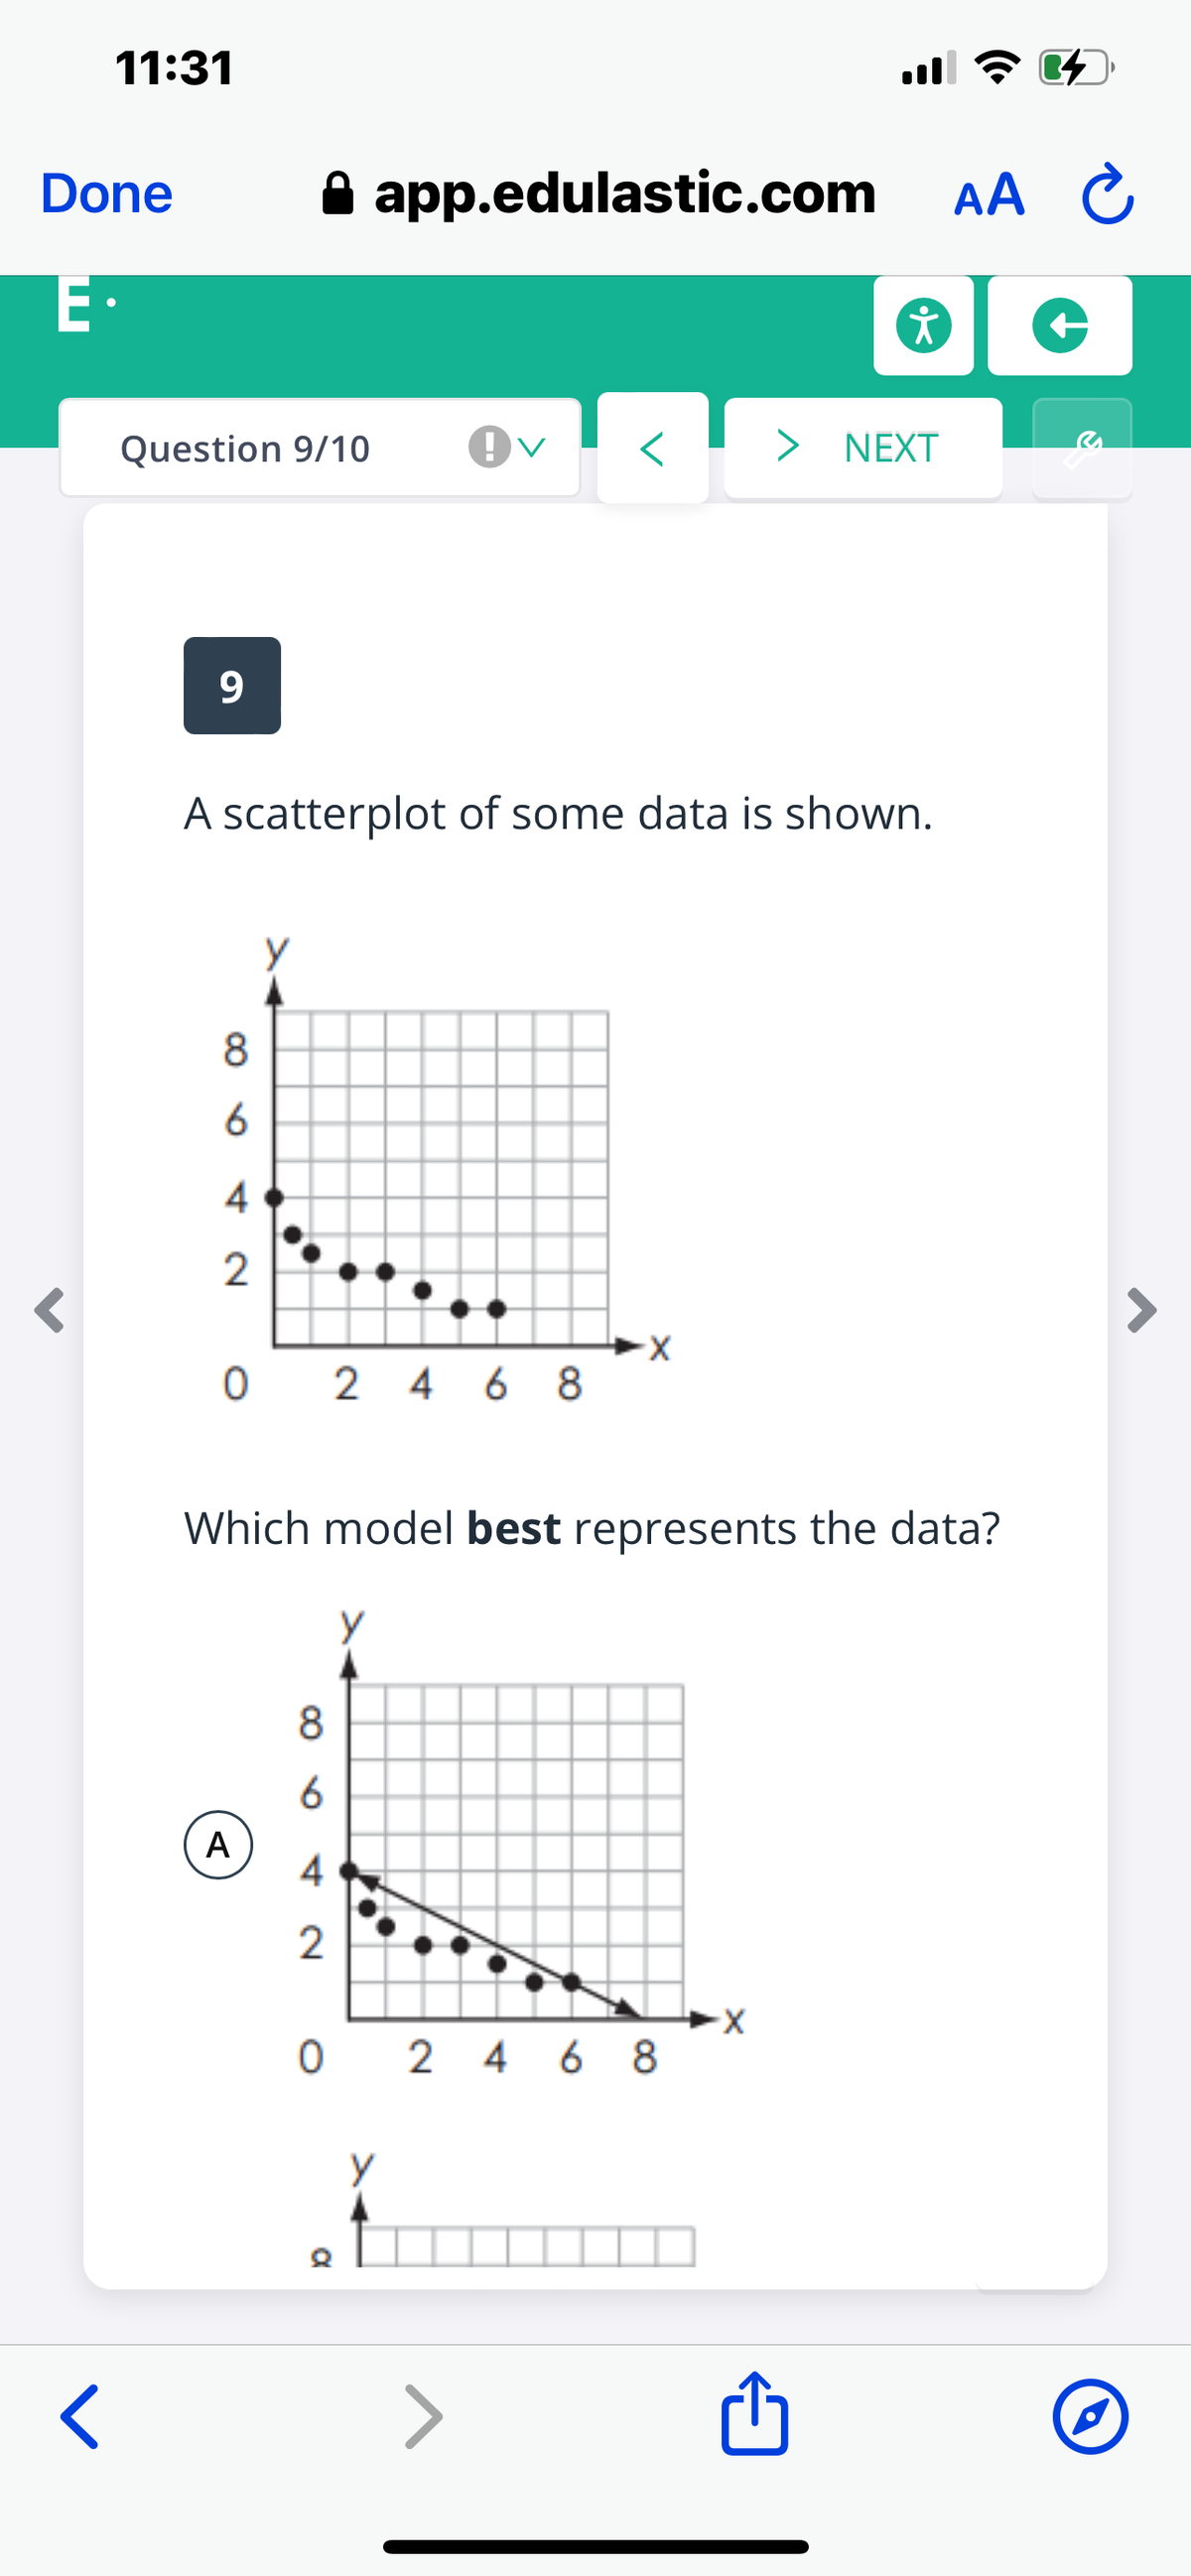 11:31
Done
app.edulastic.com AA C
E·
Question 9/10
> NEXT
9.
A scatterplot of some data is shown.
8.
4
2
0 2 4 6 8
Which model best represents the data?
8
6
A
O 2 4 6 8
